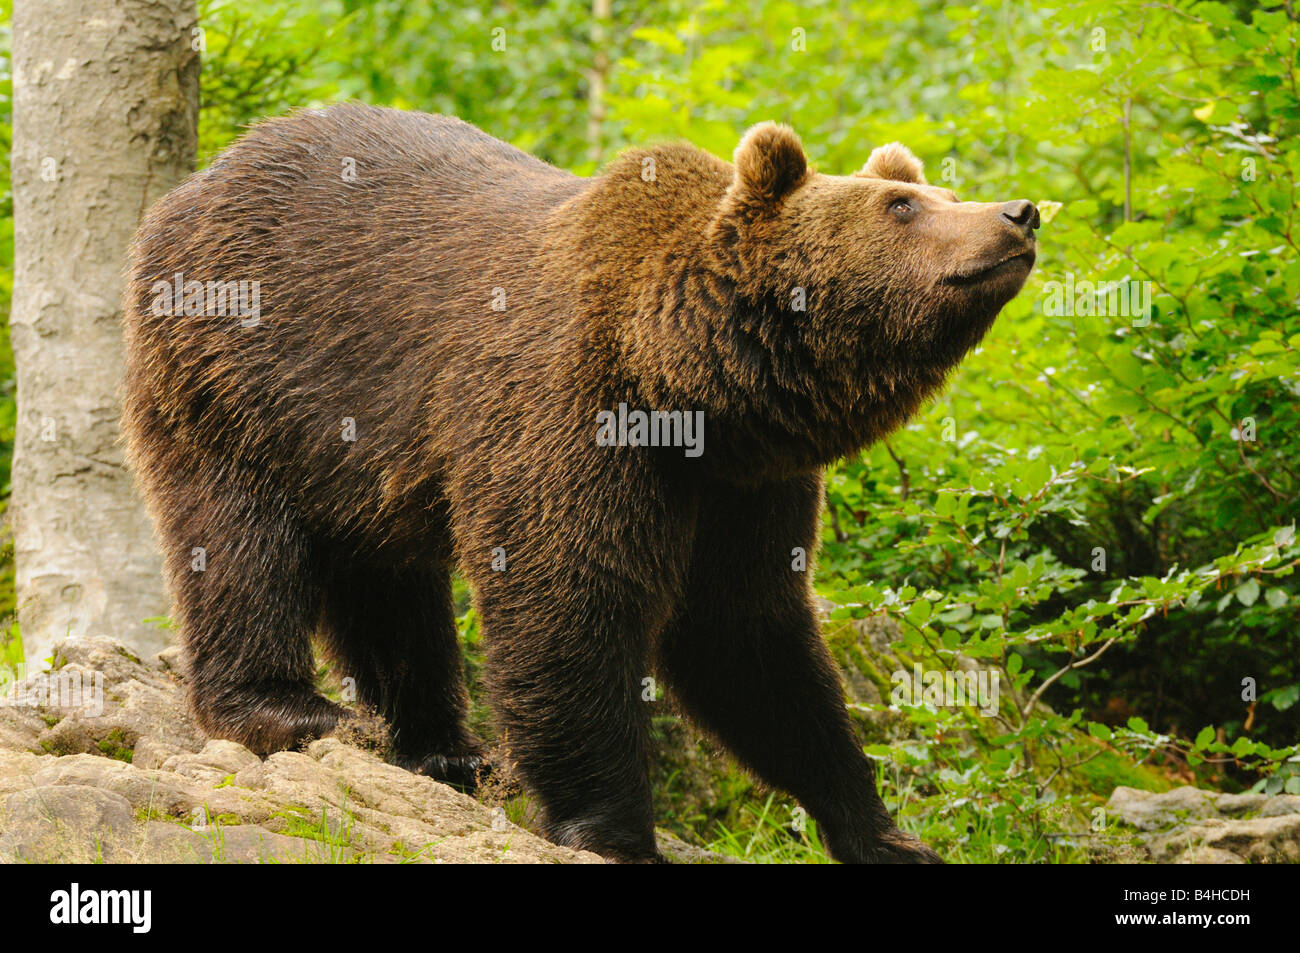 Grizzly bear (Ursus arctos horribilis) foraging in forest, Bavarian Forest, Bavaria, Germany Stock Photo